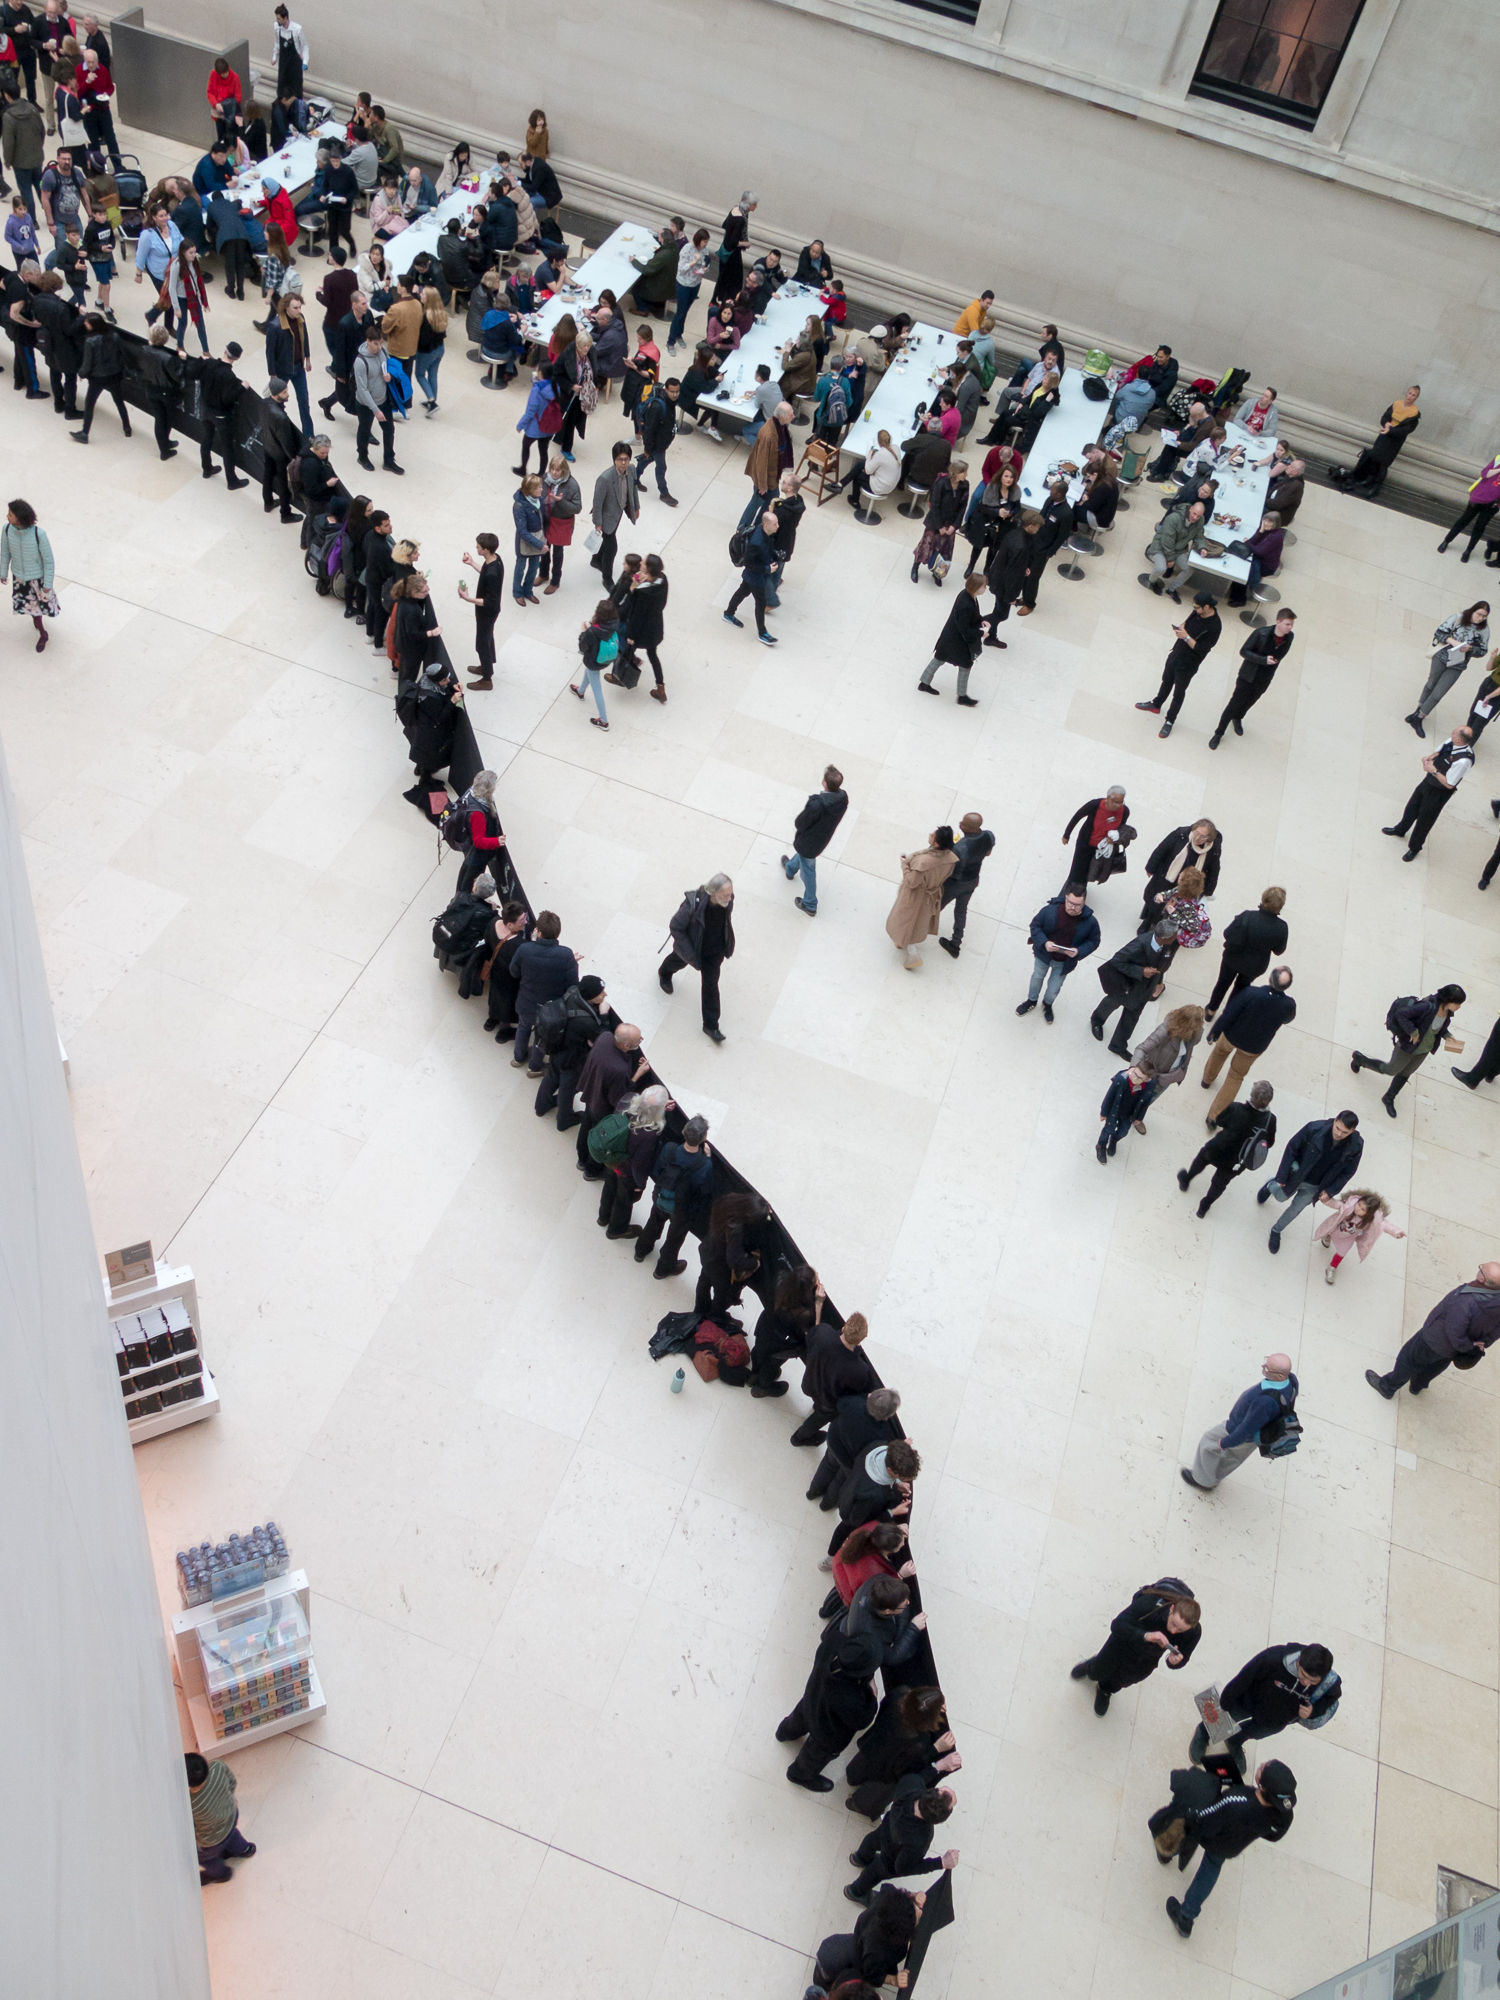 Protestors lined, holding a 200m 'living tapestry' around the rotunda. Photo taken from above